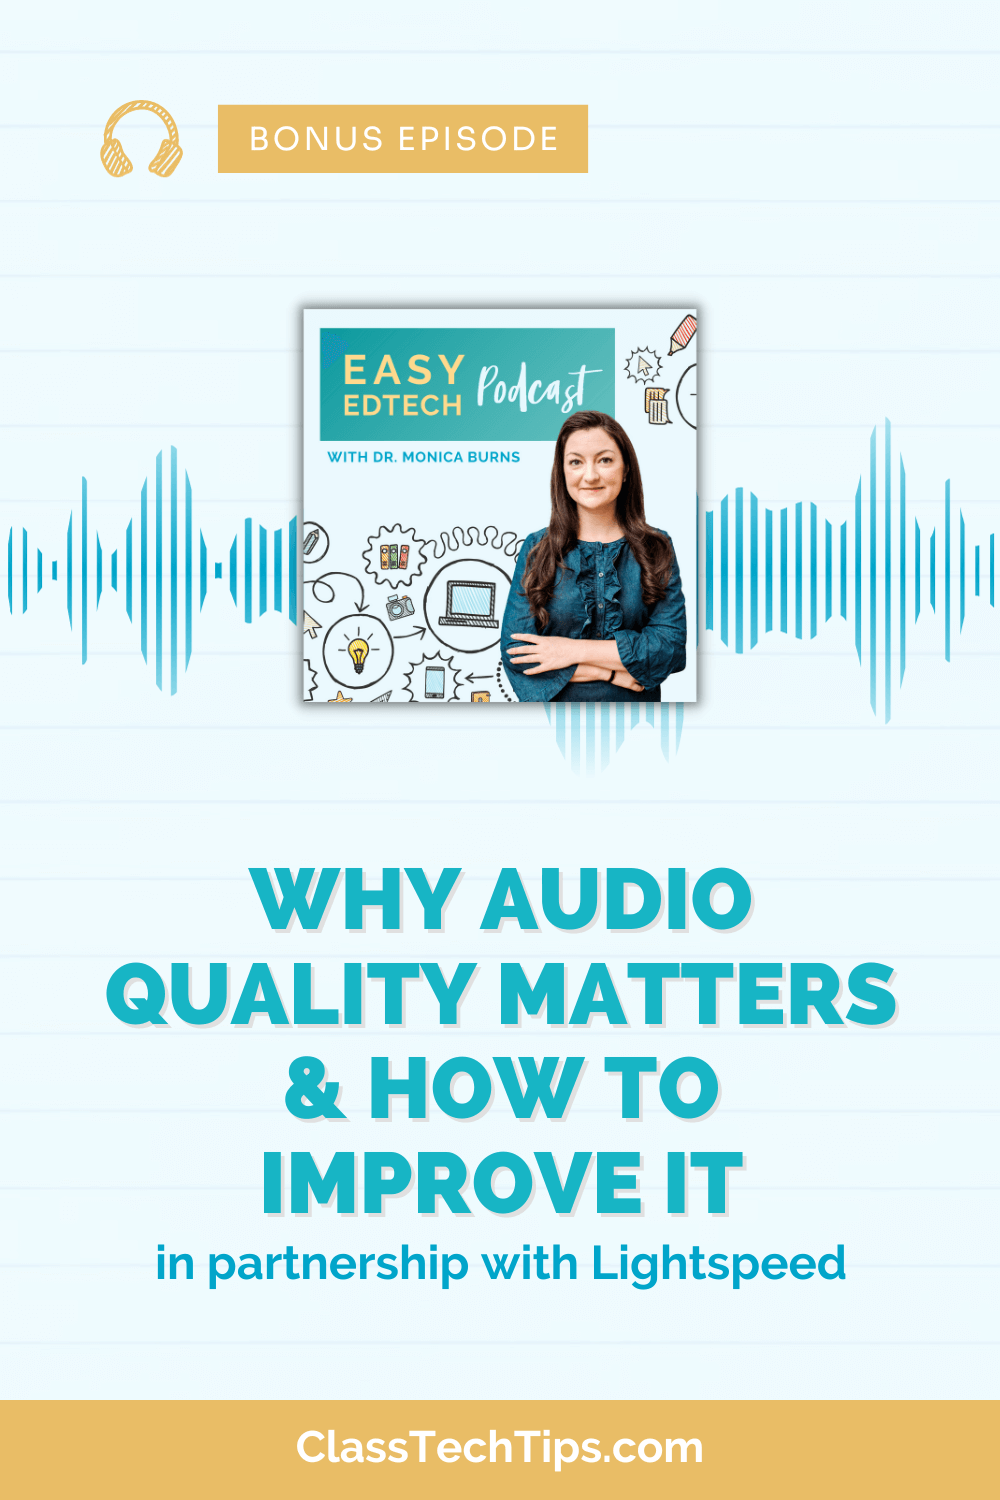 Podcast logo with soundwaves highlighting the importance of audio quality in classrooms for equitable access and safety.